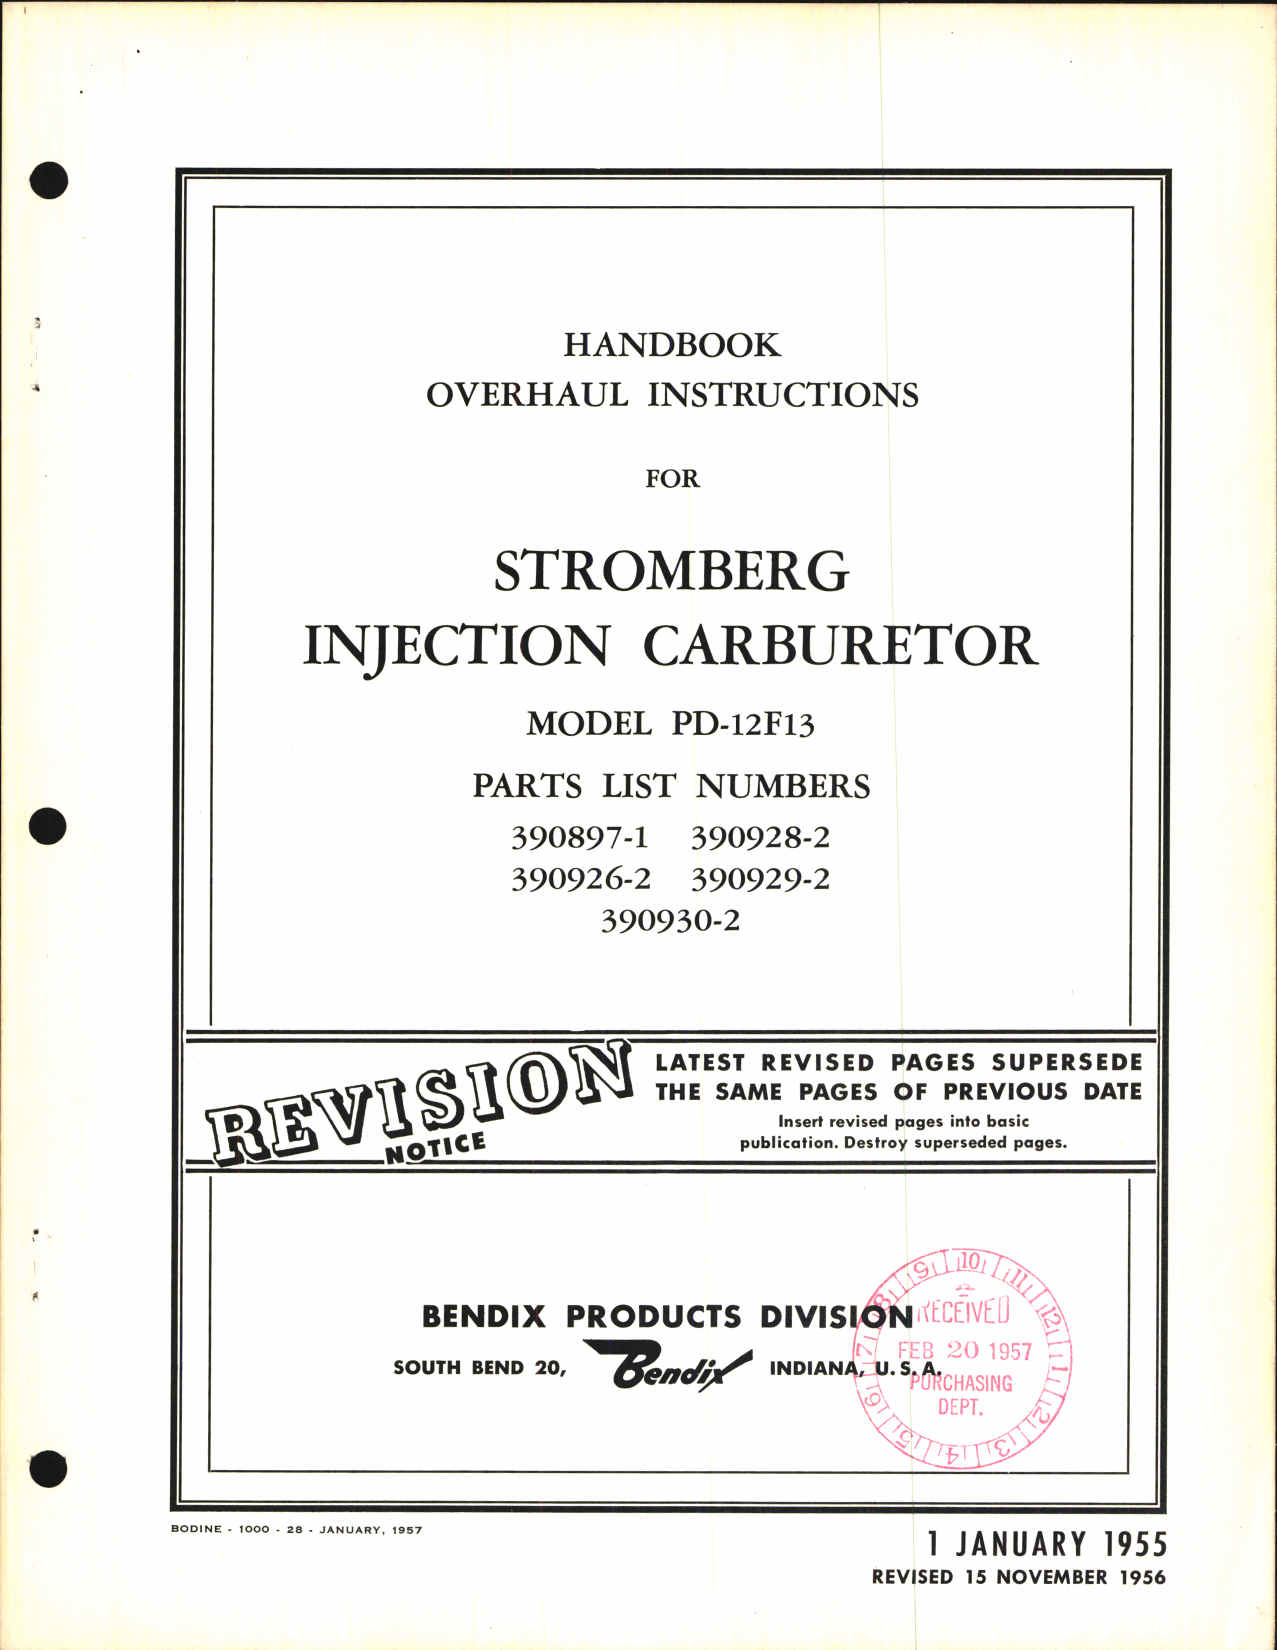 Sample page 1 from AirCorps Library document: Overhaul Instructions for Stromberg Injection Carburetor Model PD-12F13